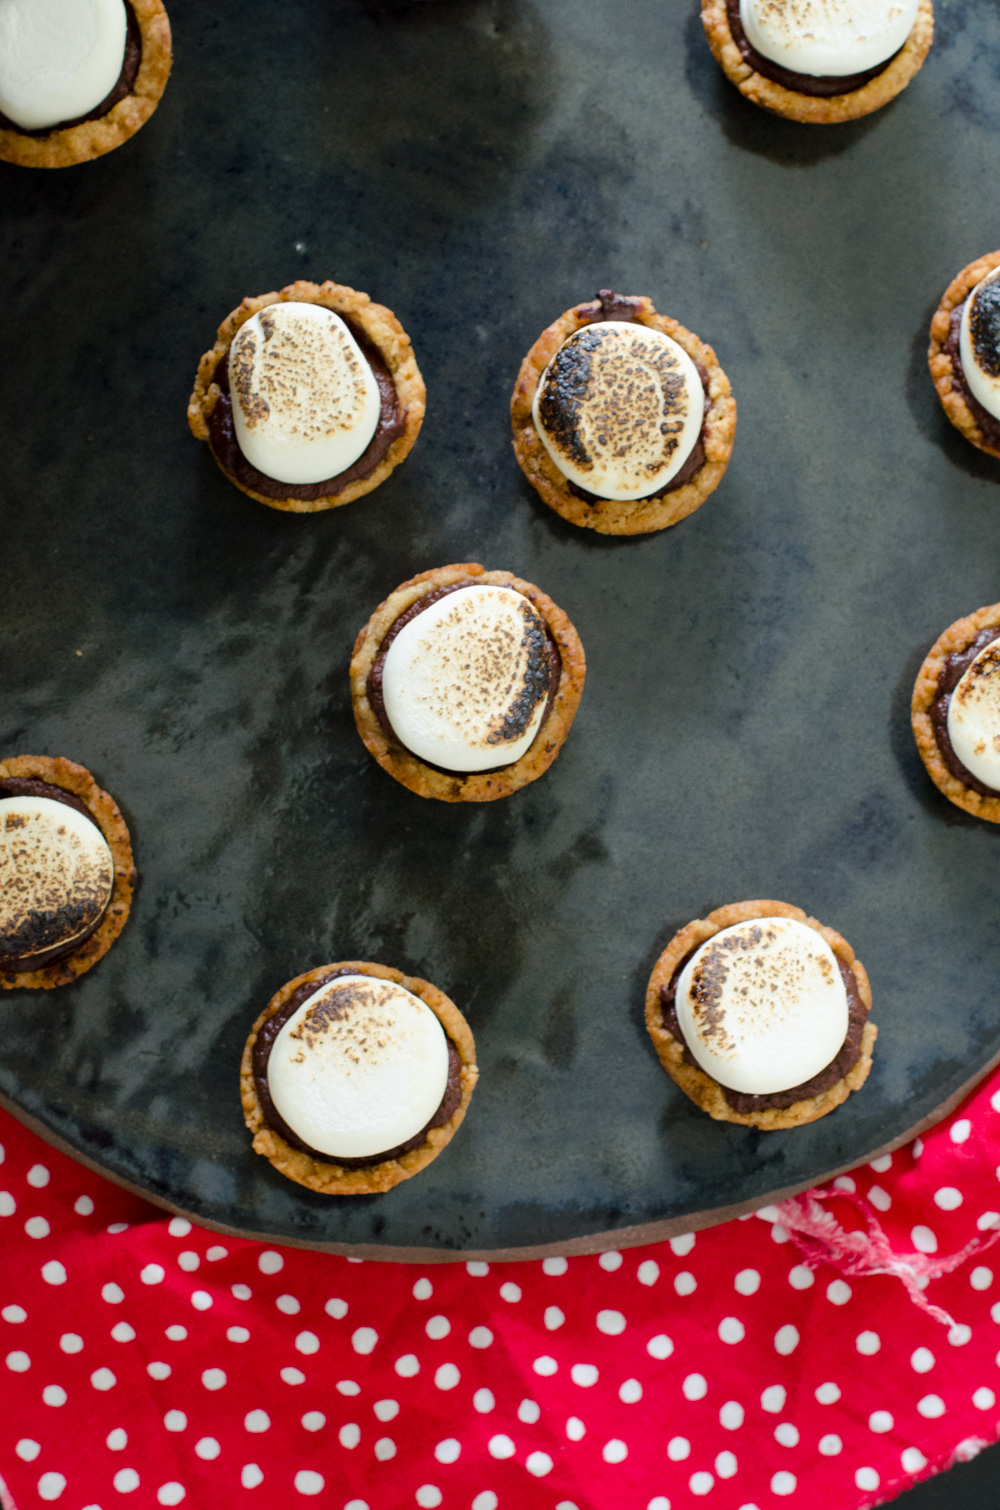 S'mores Cookie Cups recipe from ChefSarahElizabeth.com